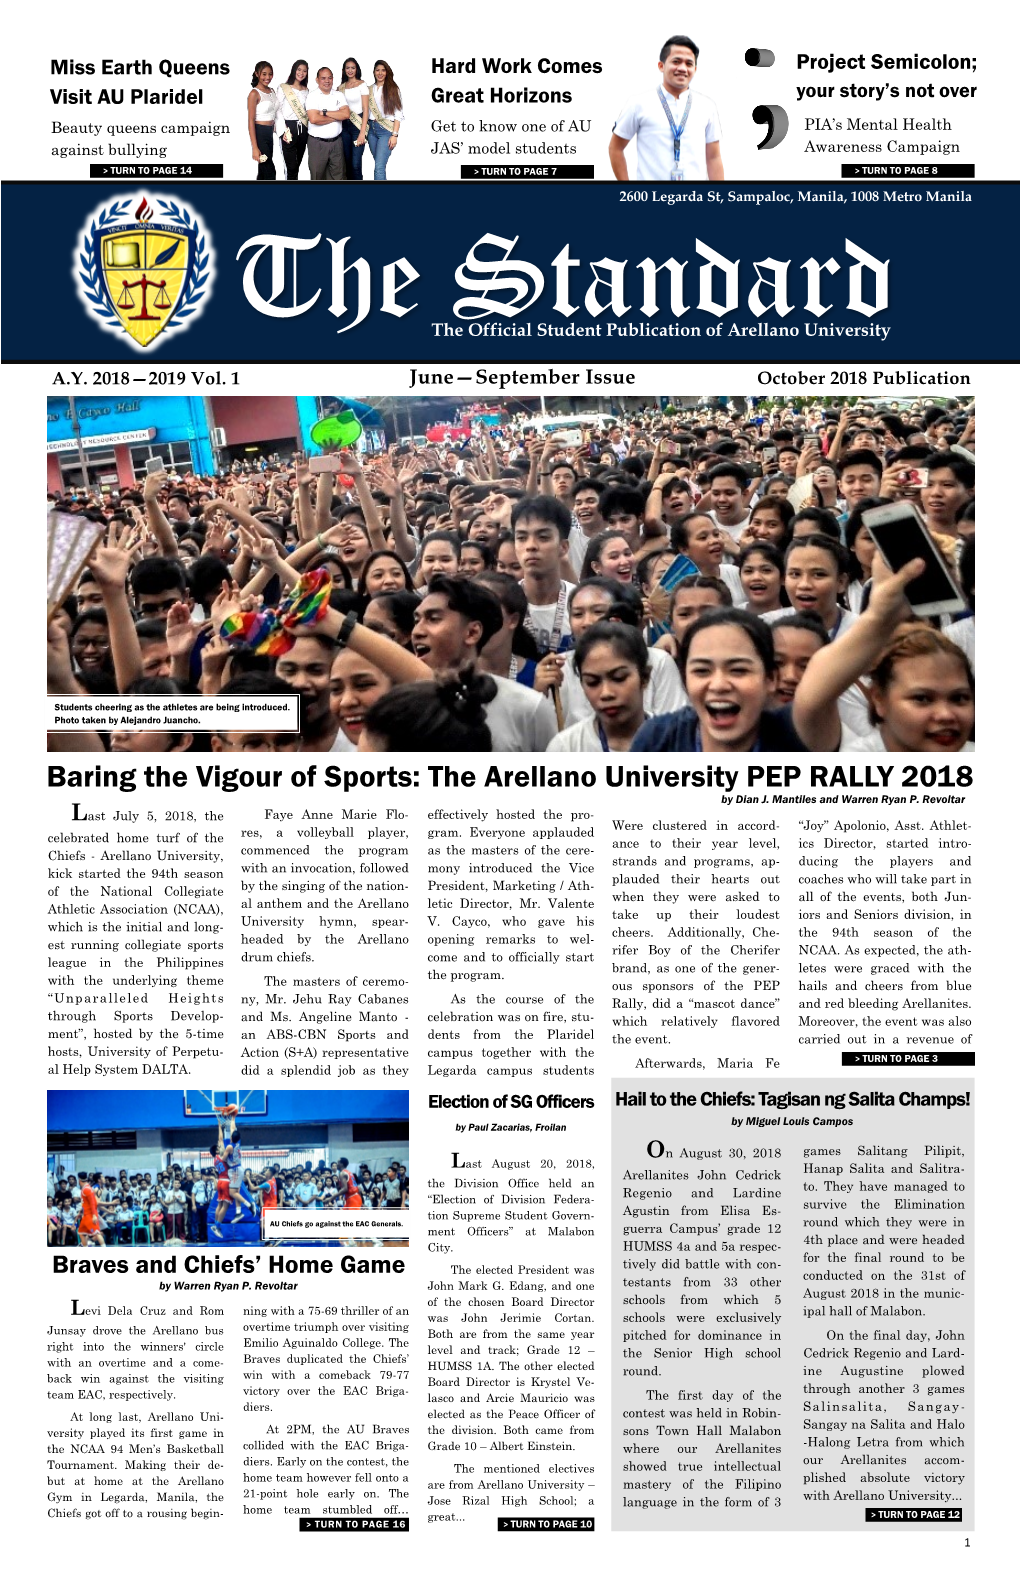 Baring the Vigour of Sports: the Arellano University PEP RALLY 2018 by Dian J